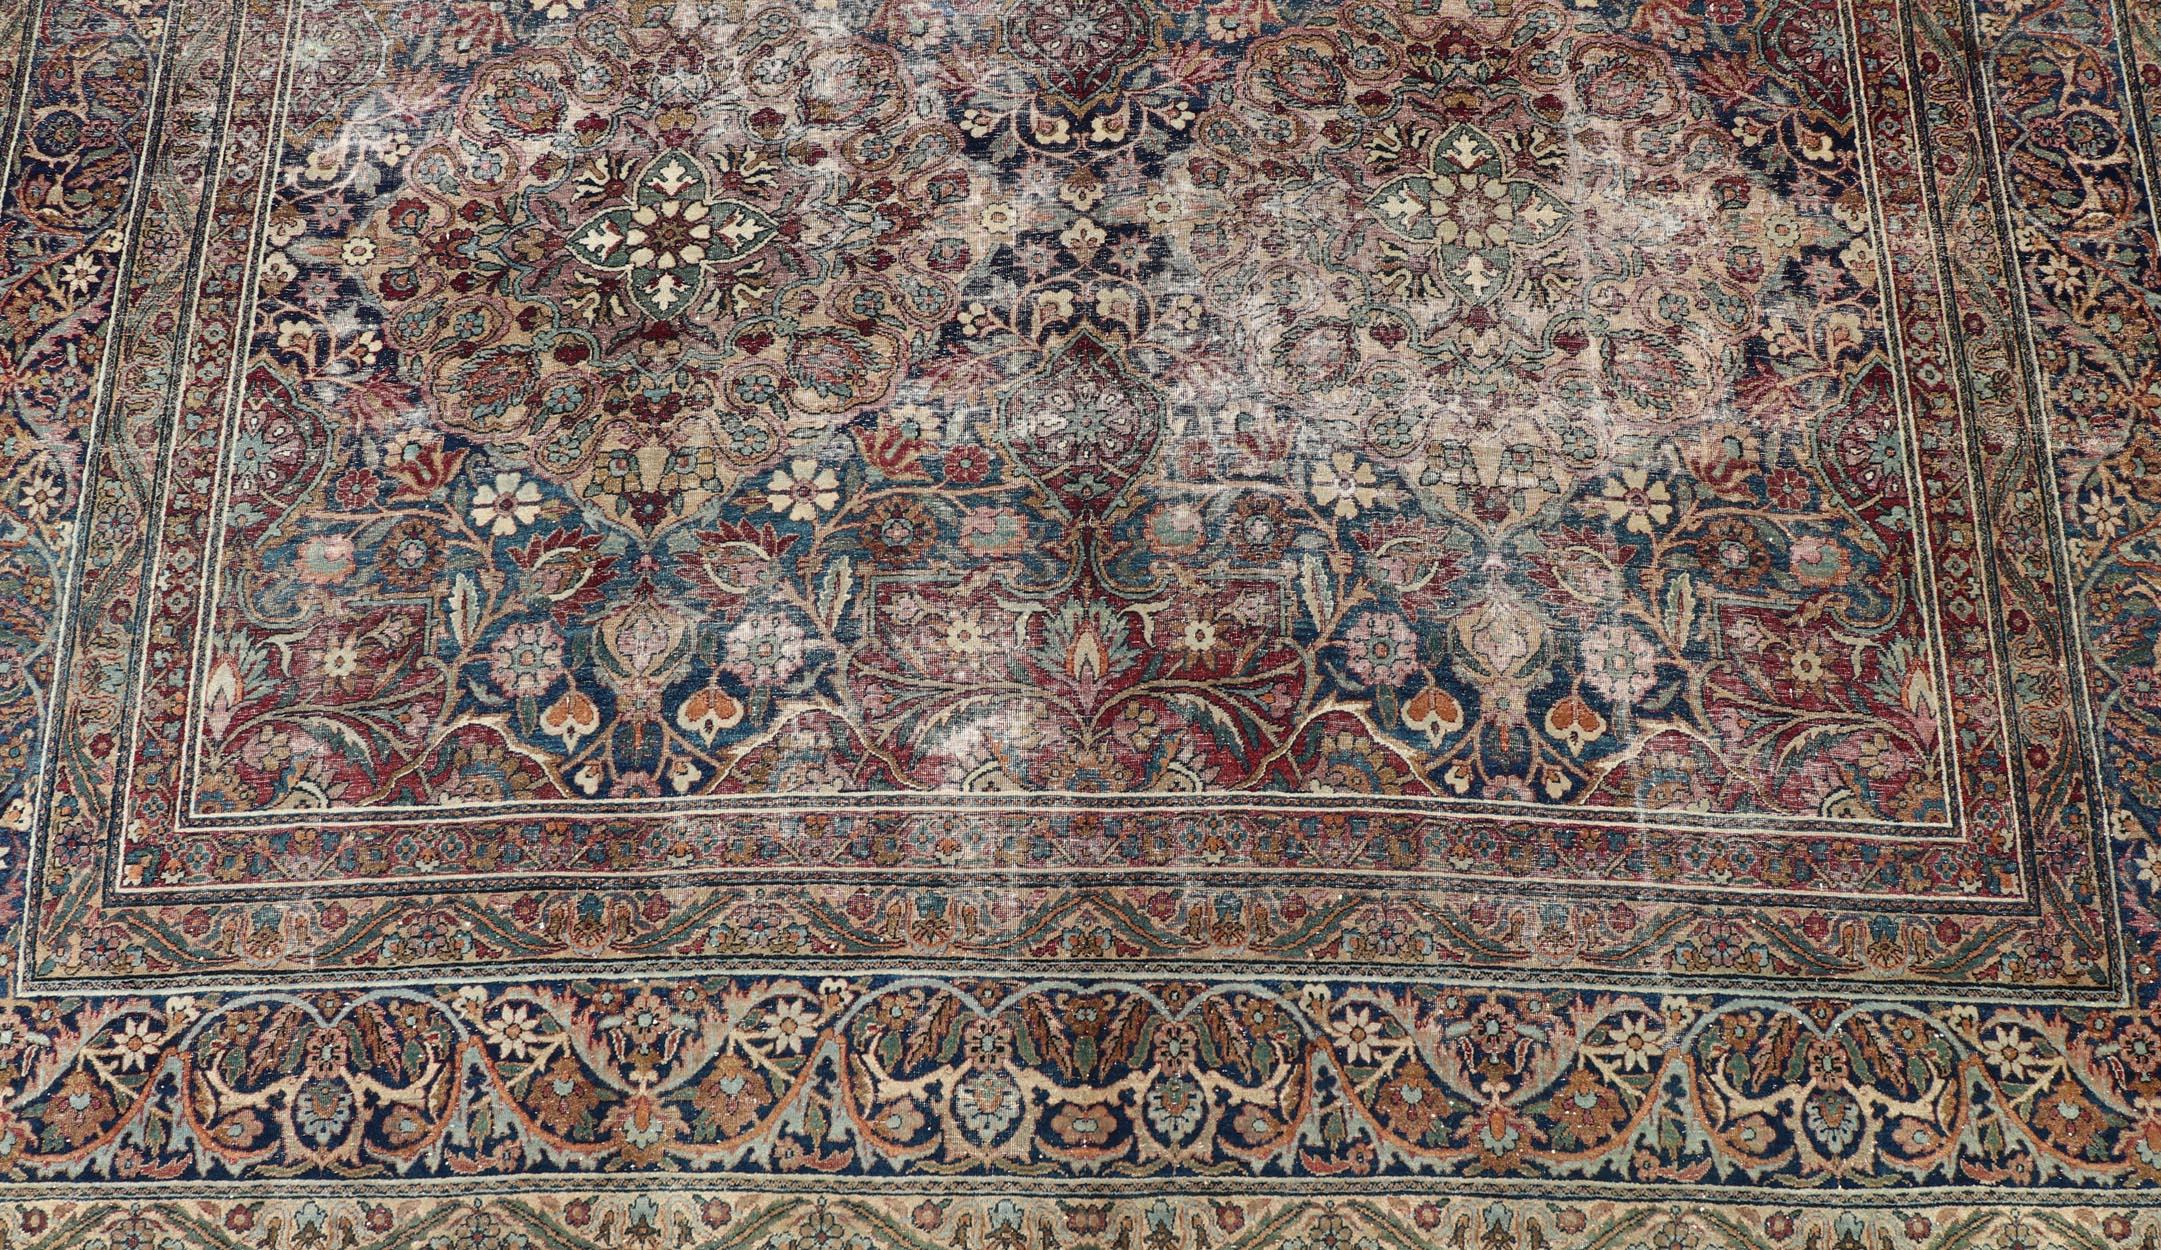 Antique Persian Lavar Kerman Large Gallery Rug with All-Over Floral Design For Sale 4